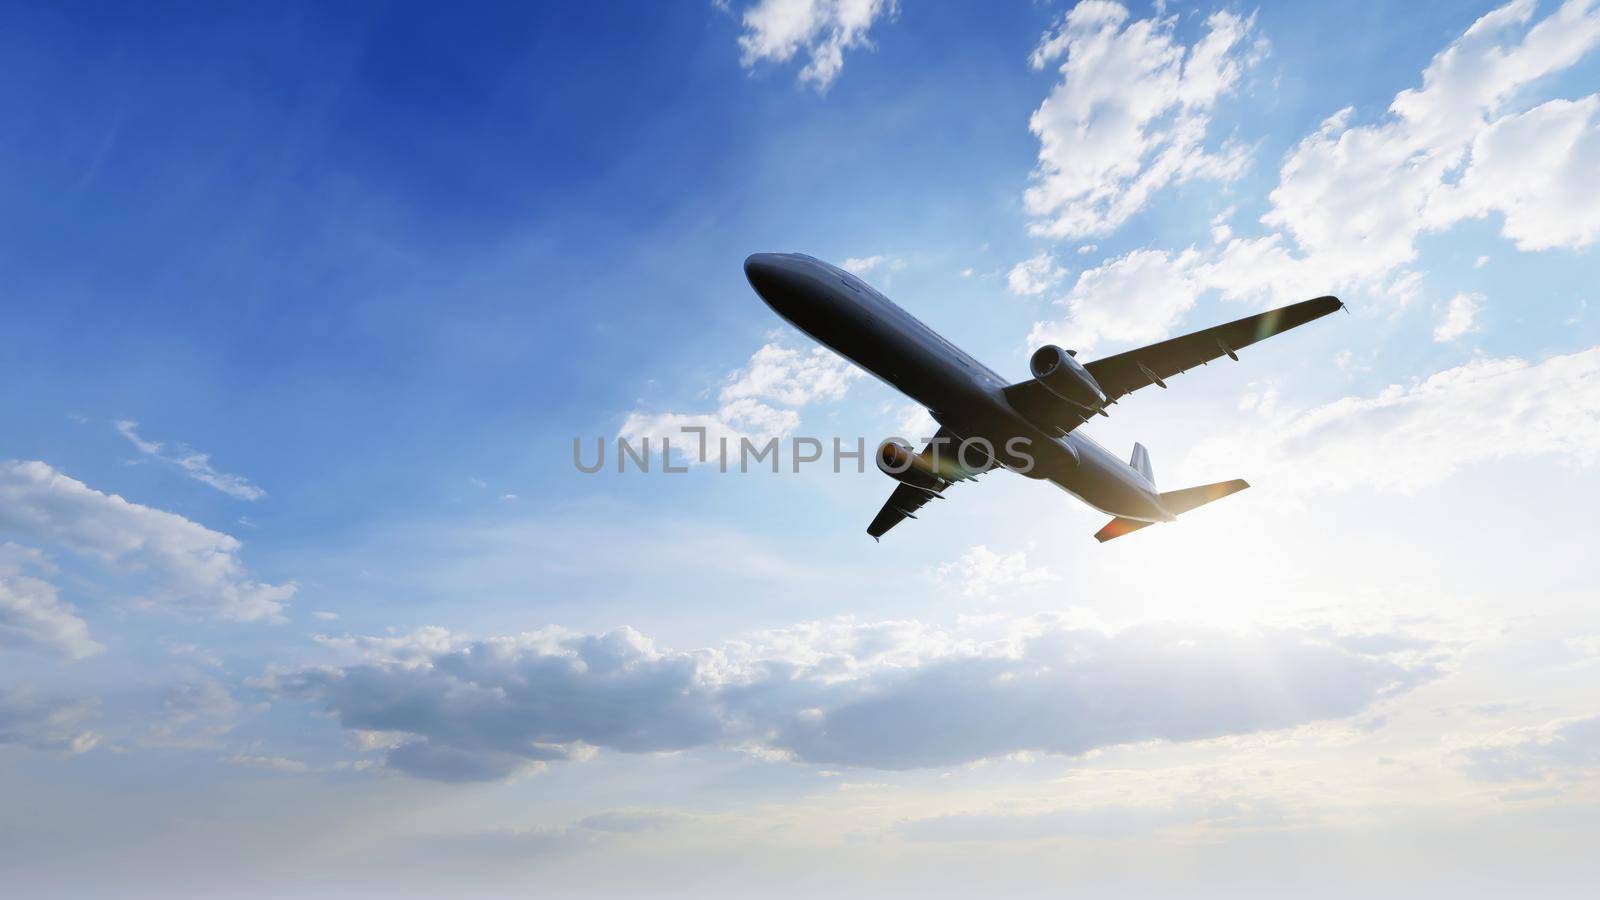 Airplane flying in the air with sunlight shining in blue sky background. Travel journey and Wanderlust transportation concept. 3D illustration rendering